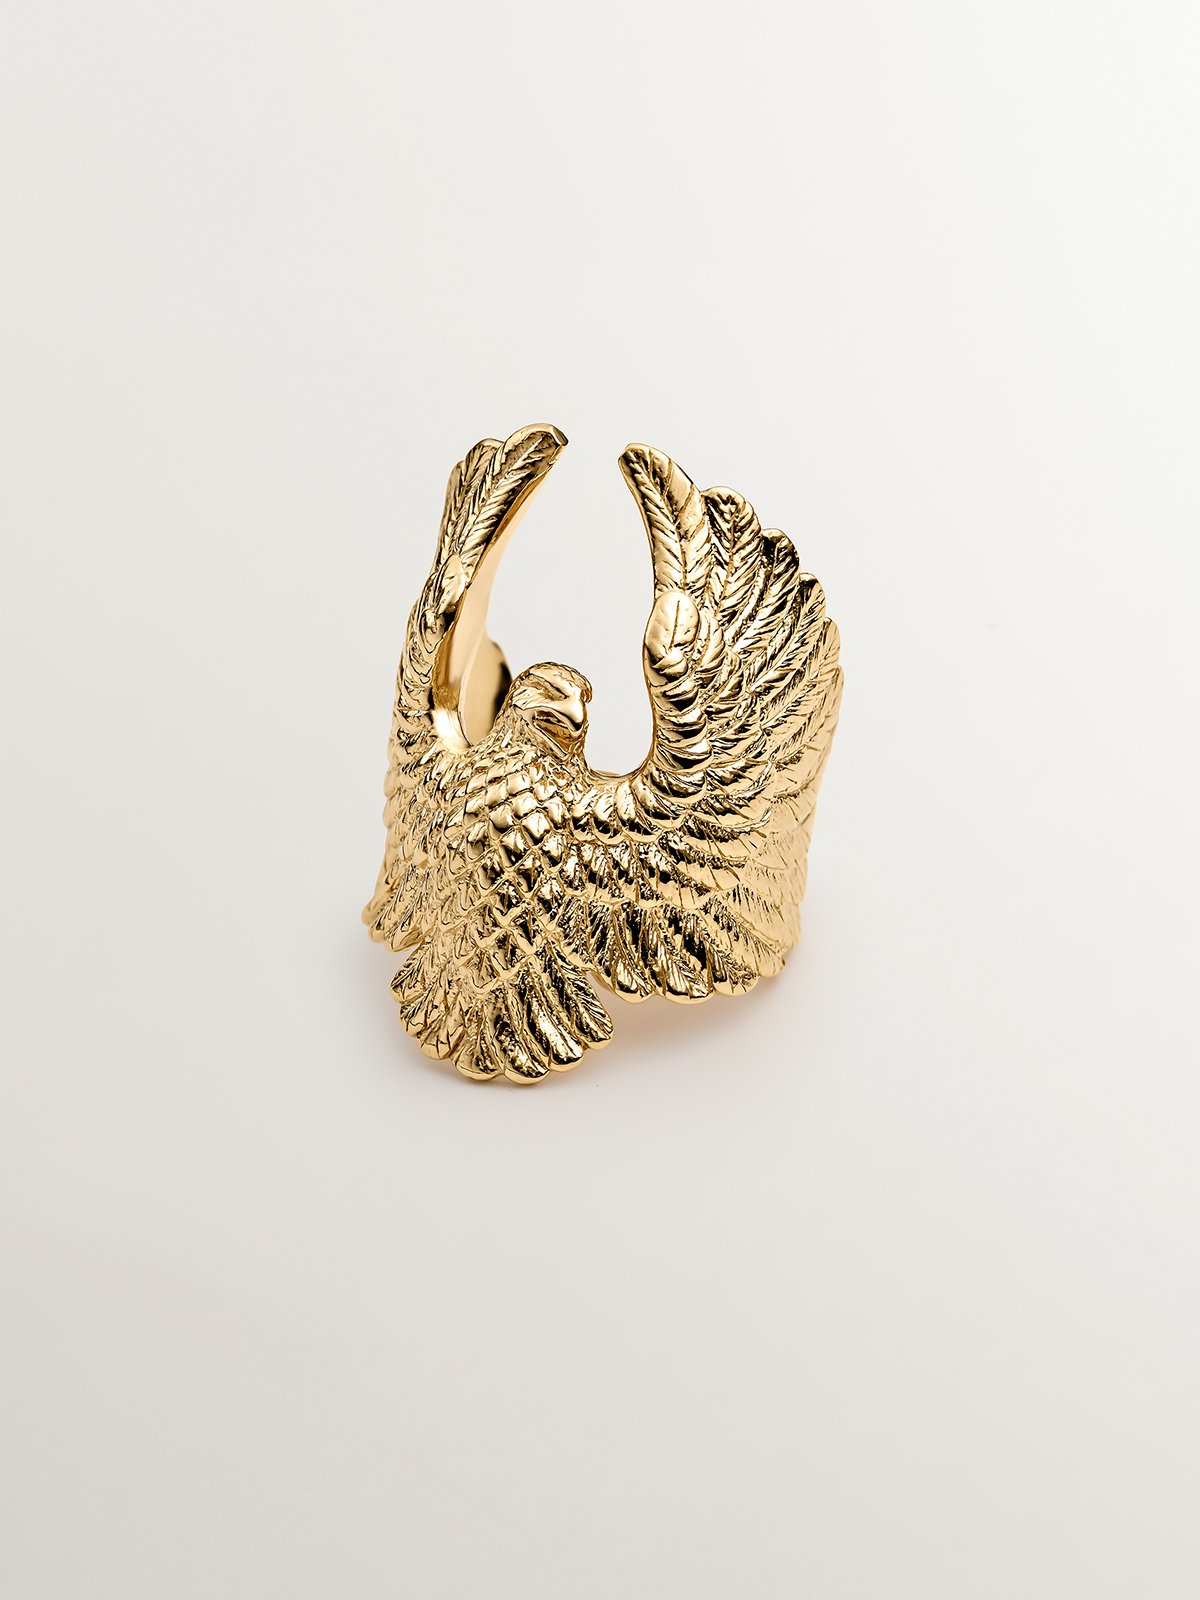 Wide 925 silver ring coated in 18K yellow gold with an eagle shape.